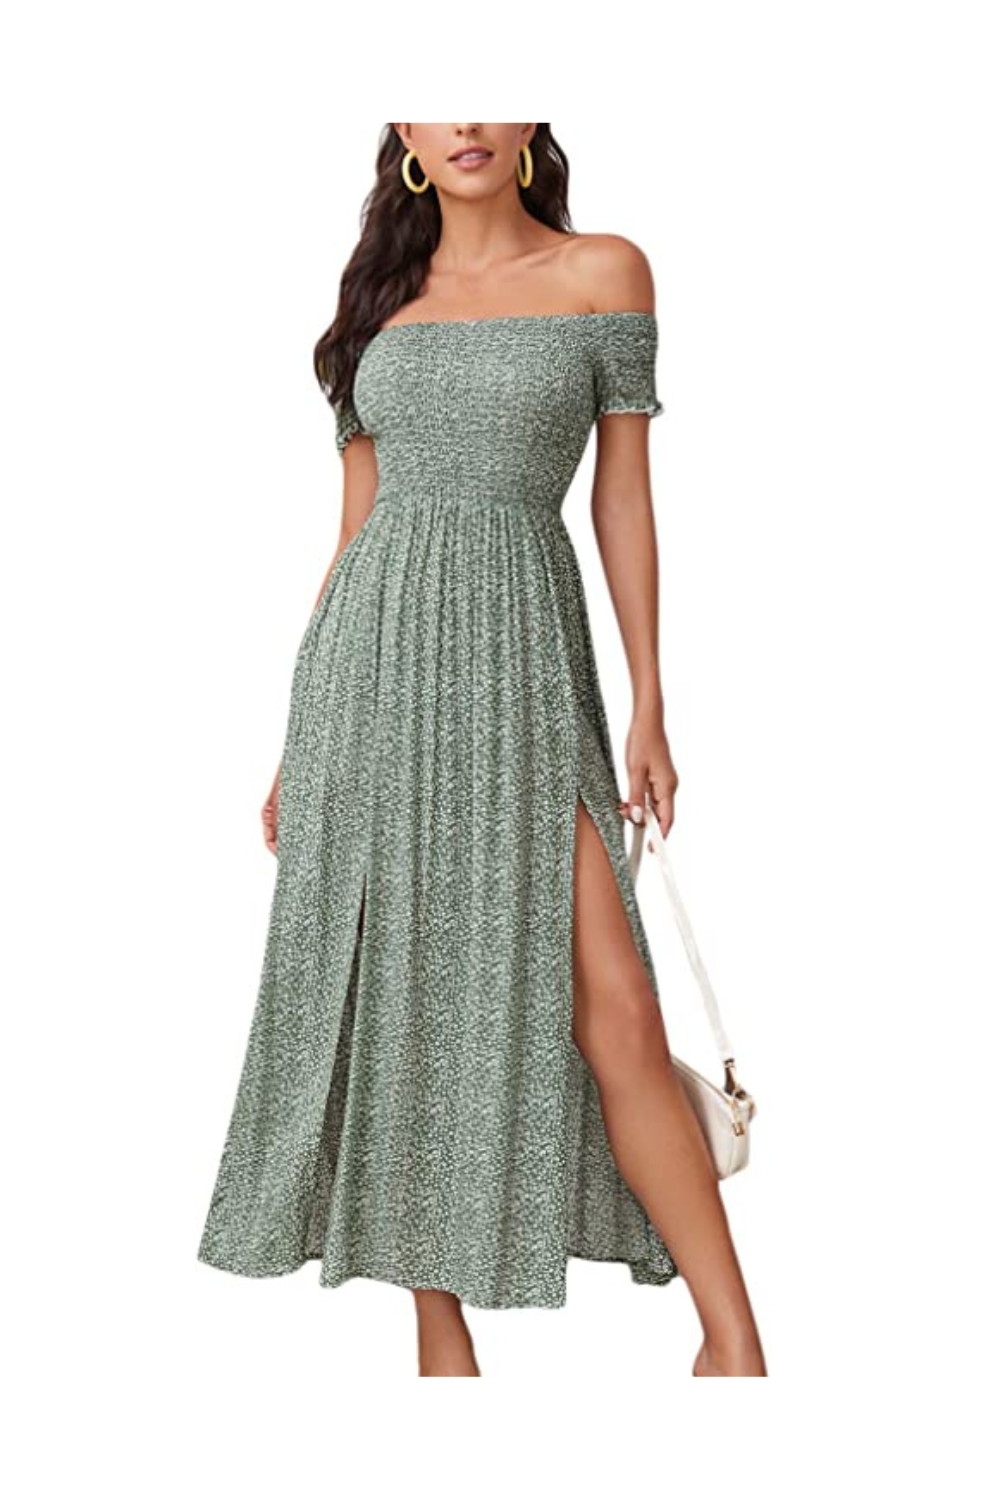 Photoshoot Dresses (26).png